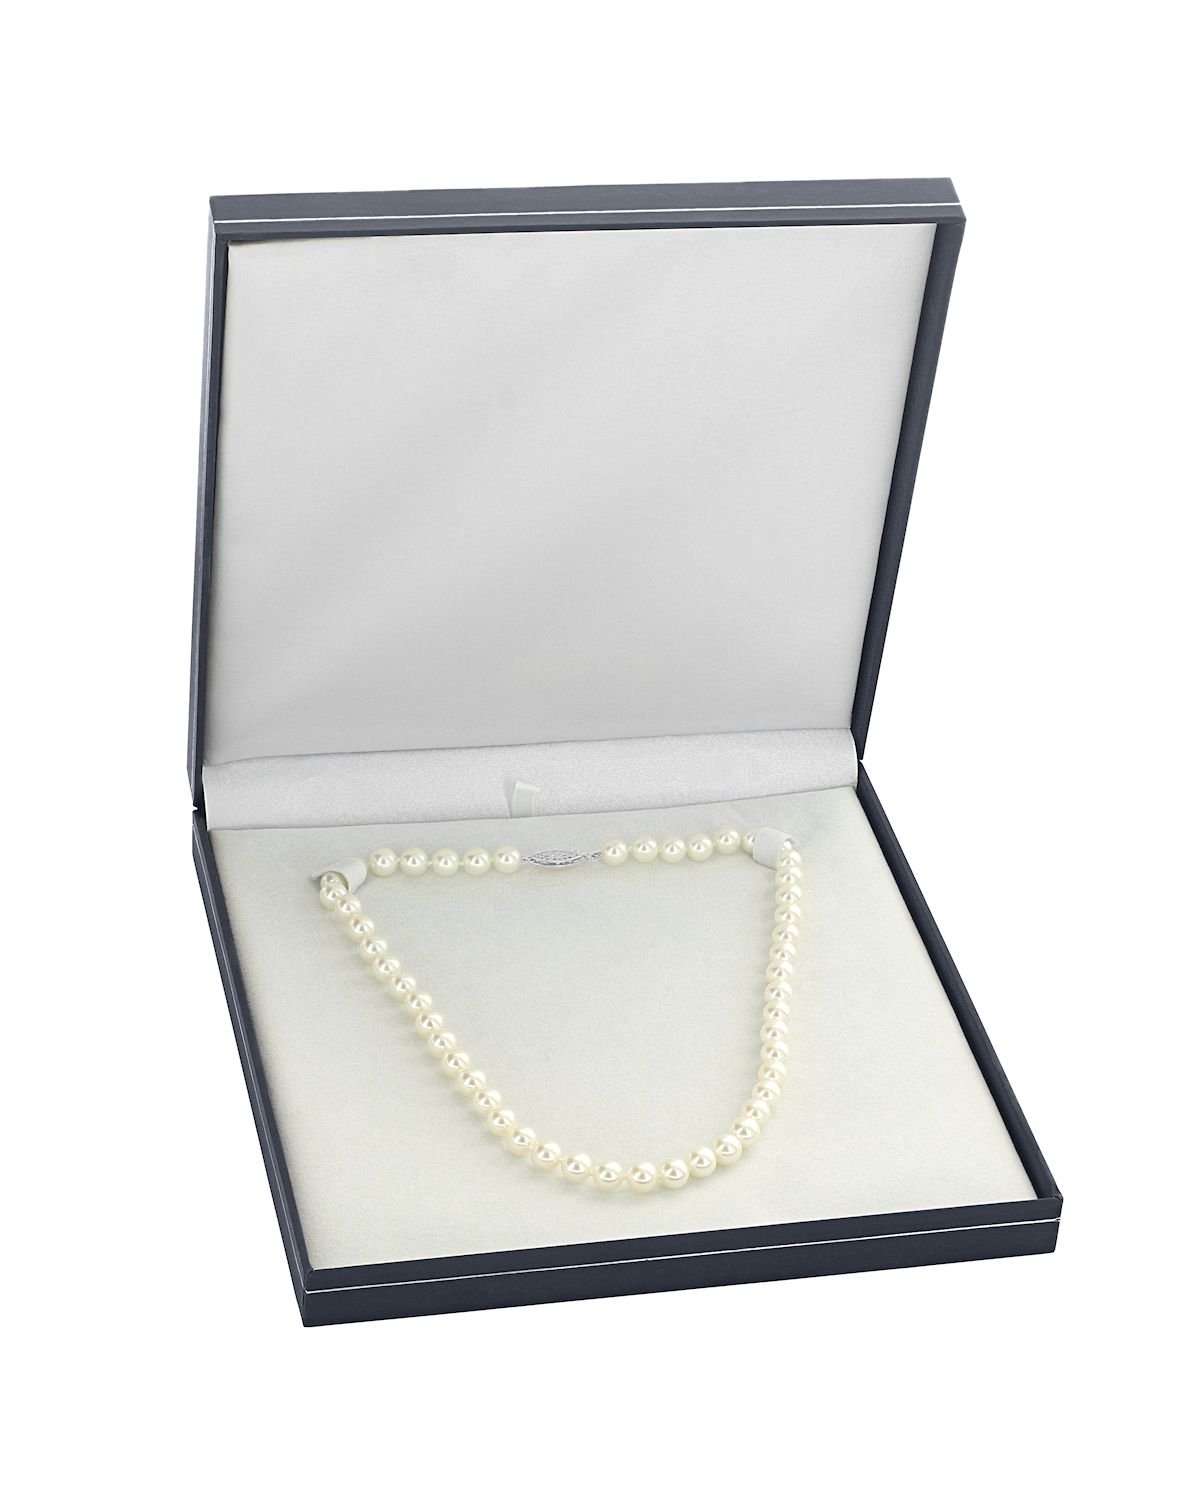 White Japanese Akoya Pearl Necklace, 9.0-9.5mm - AAA Quality